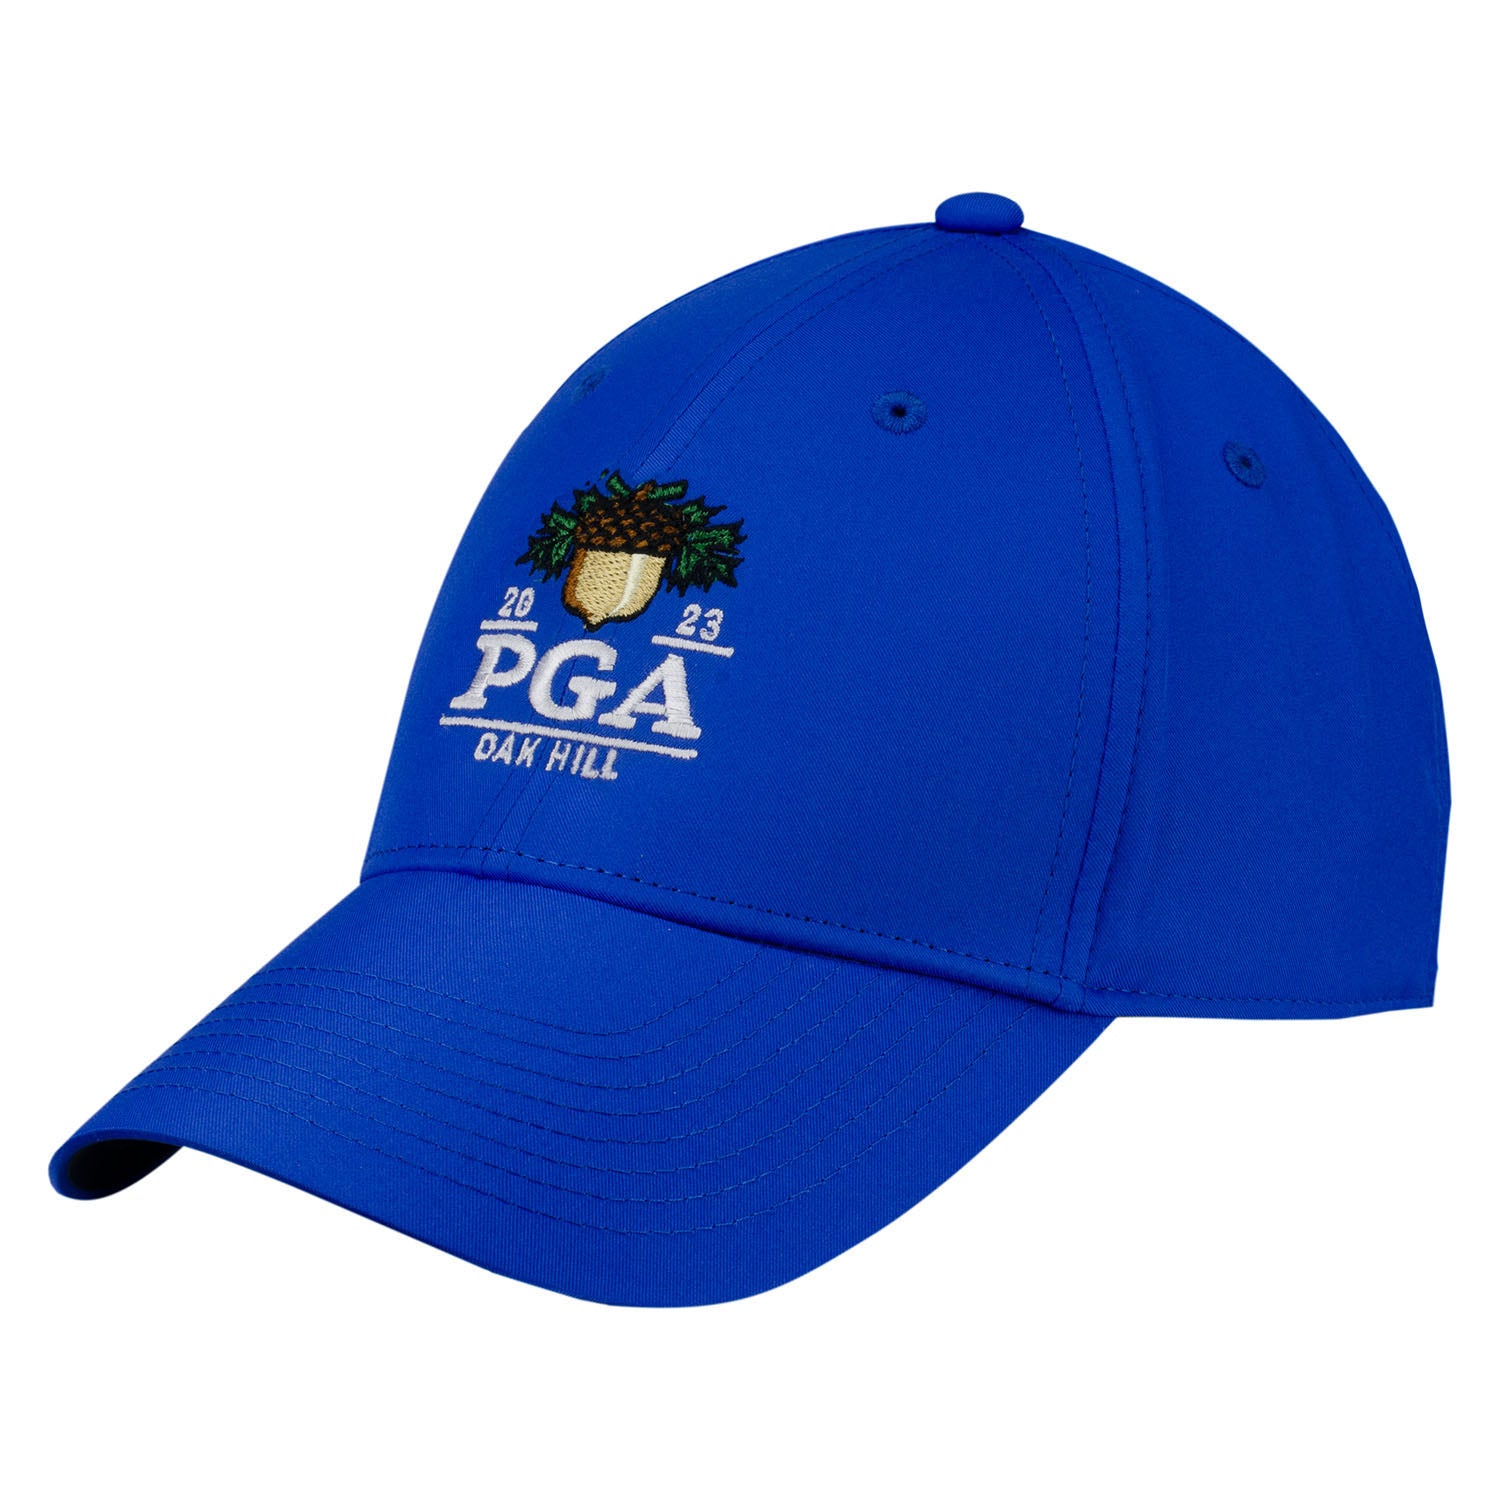 2023 PGA Championship Hats For Sale The Official Store of the PGA